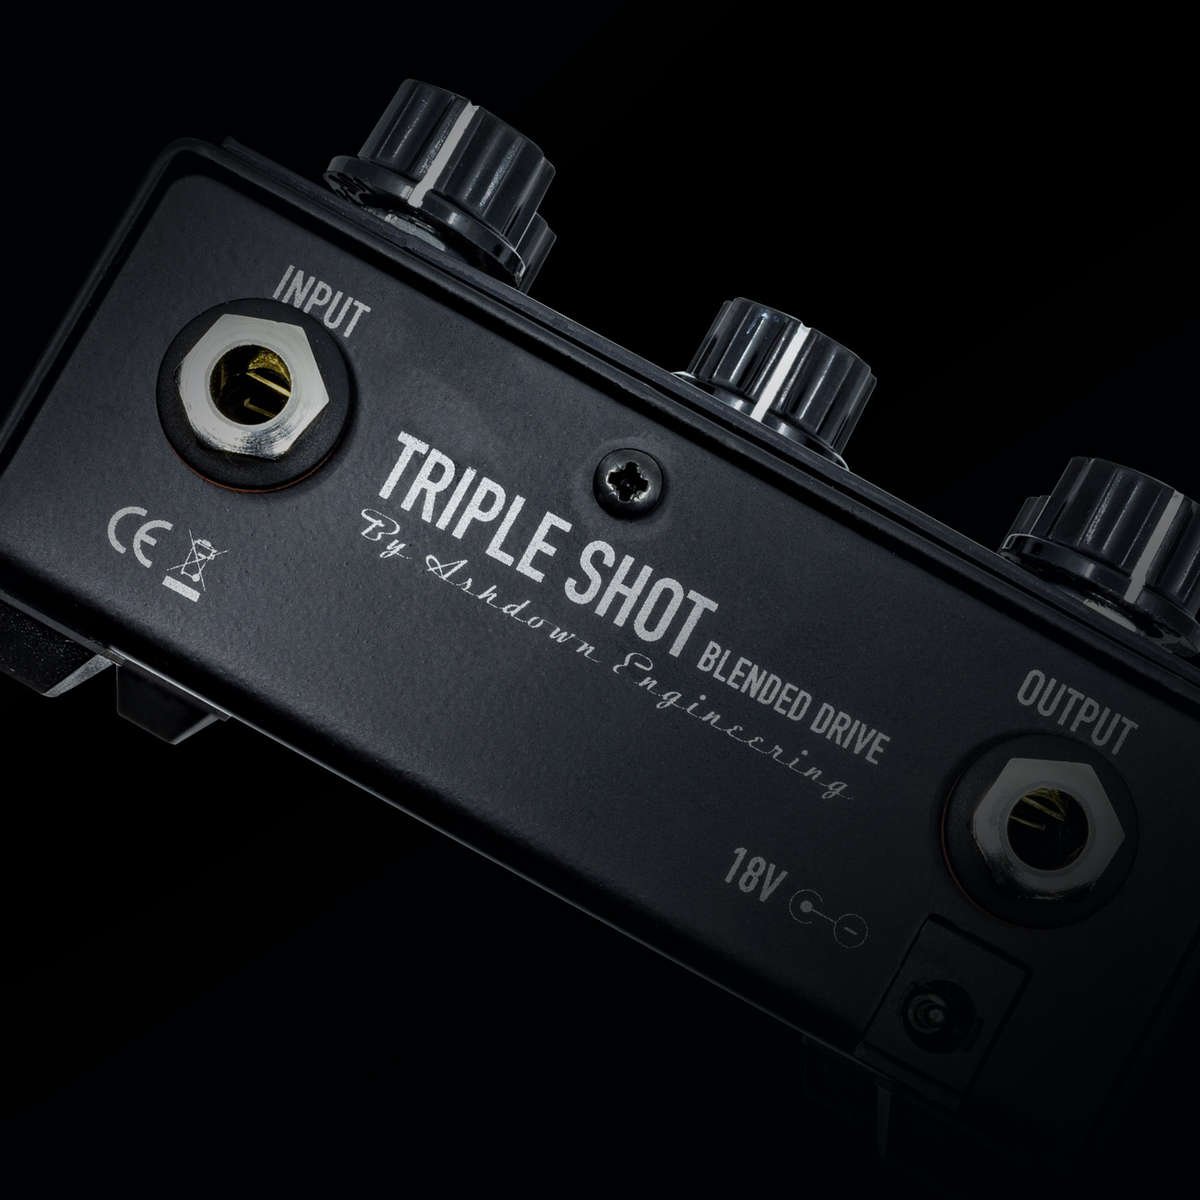 Close up of the top input and output on the Ashdown triple shot drive pedal